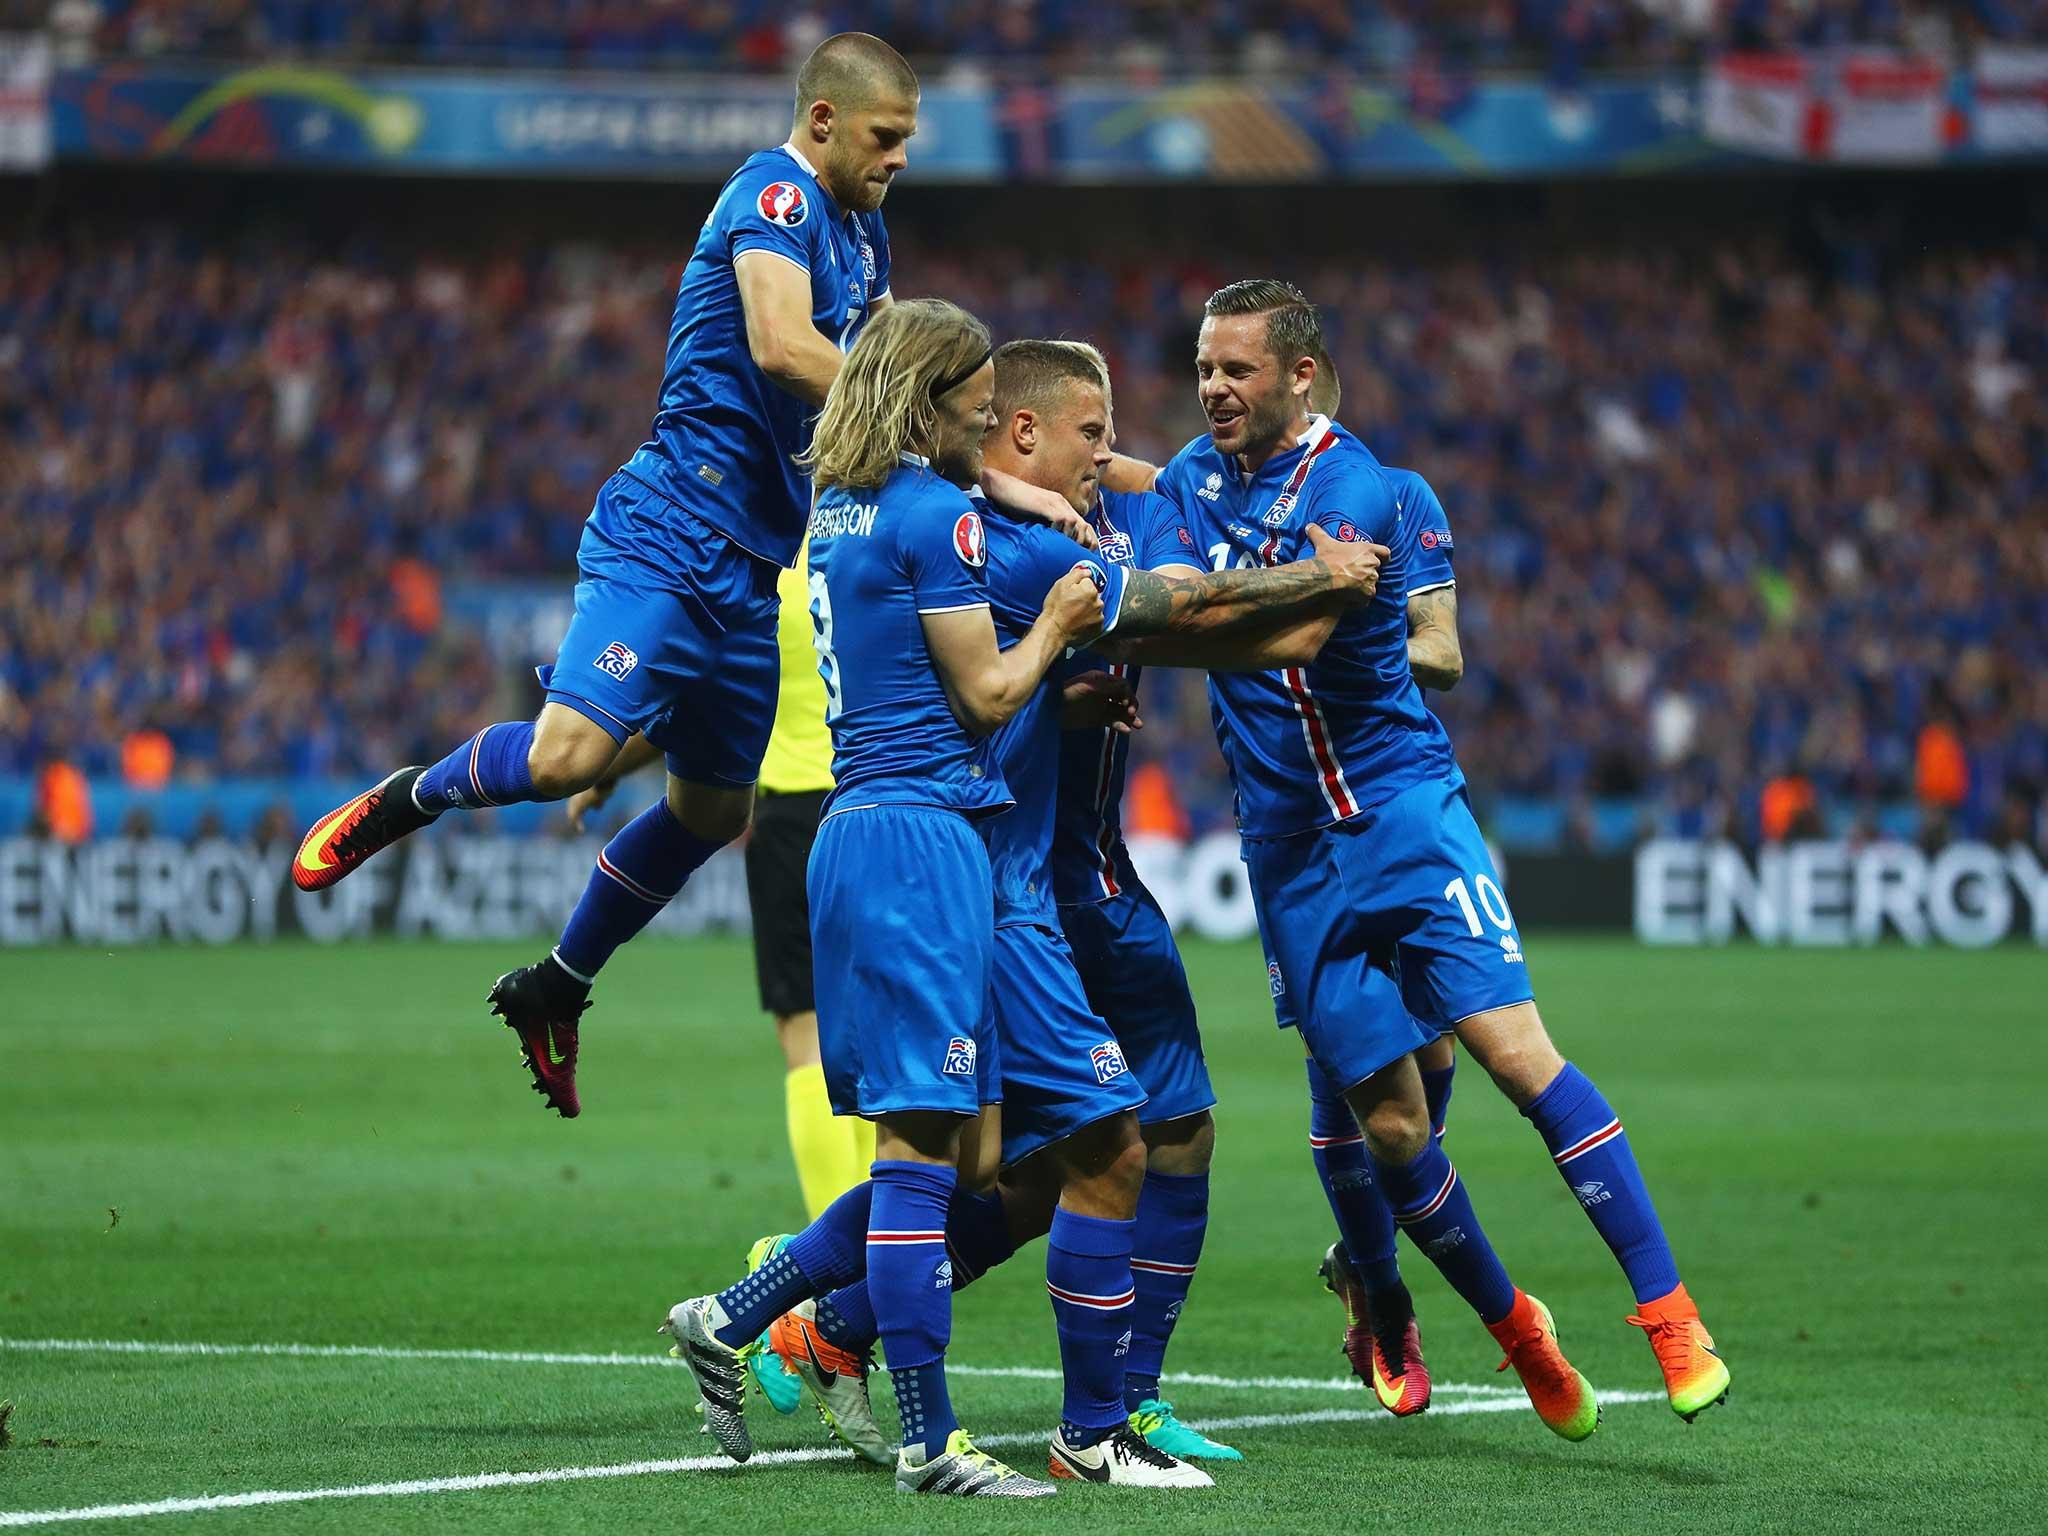 Iceland scored twice in 12 minutes to turn the game on its head